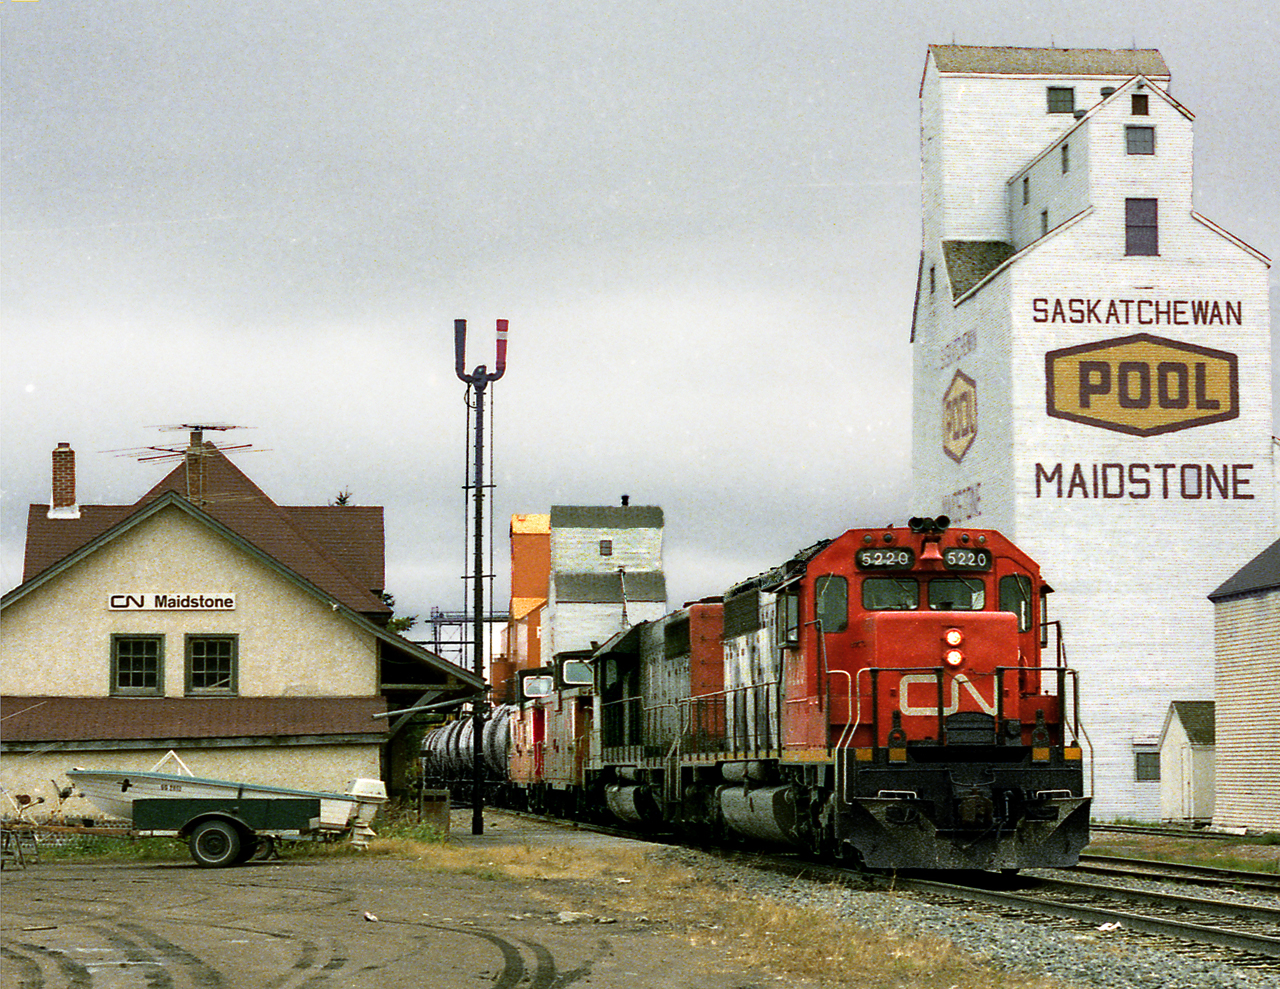 Train 353, Winnipeg to Prince George, operating on the Prairie North Line passes the station and train order office at Maidstone, just east of Lloydminster